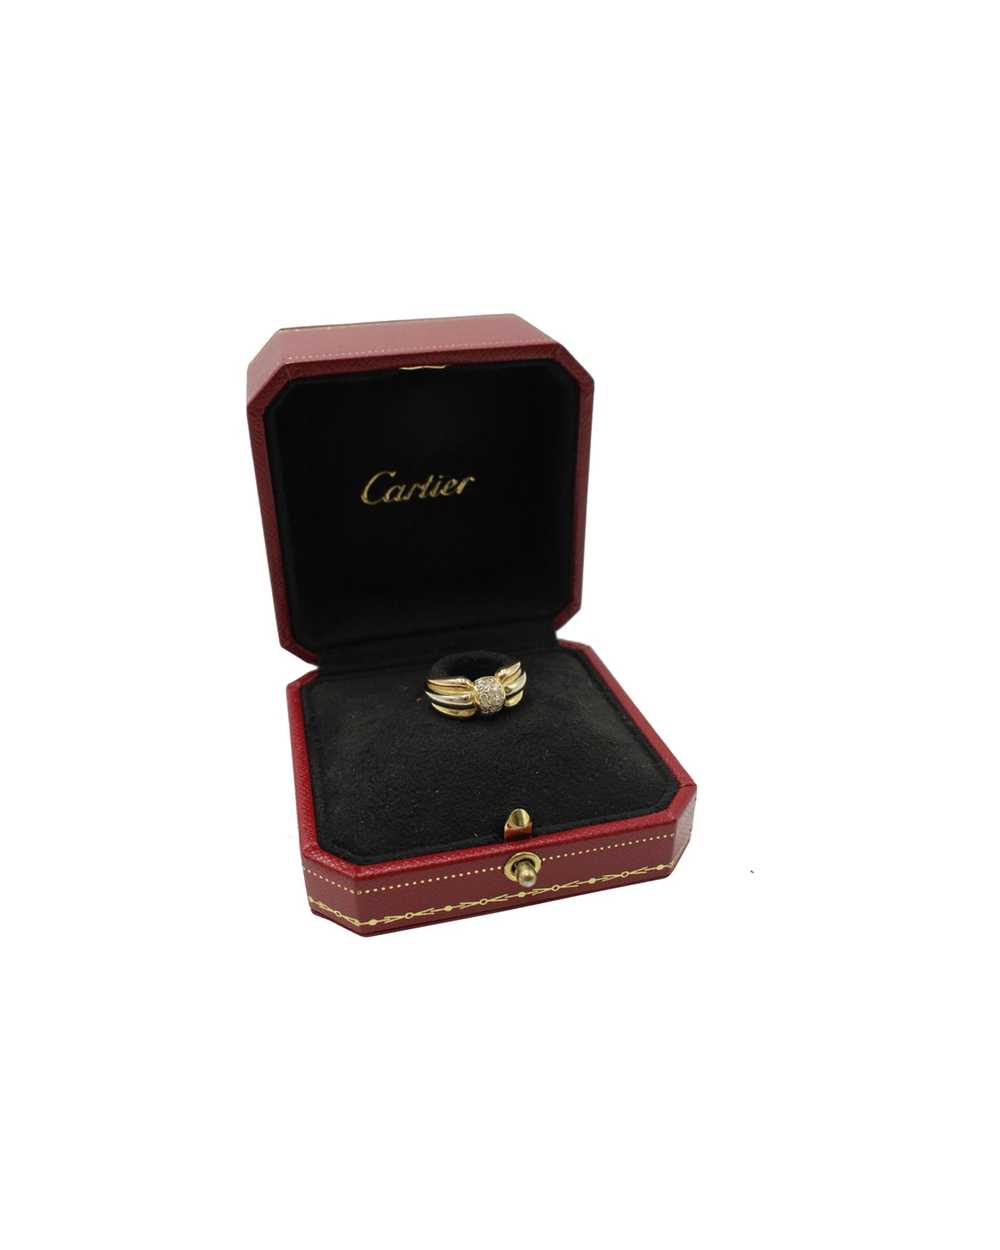 Product Details Cartier 18k Gold Diamond Ring - image 6